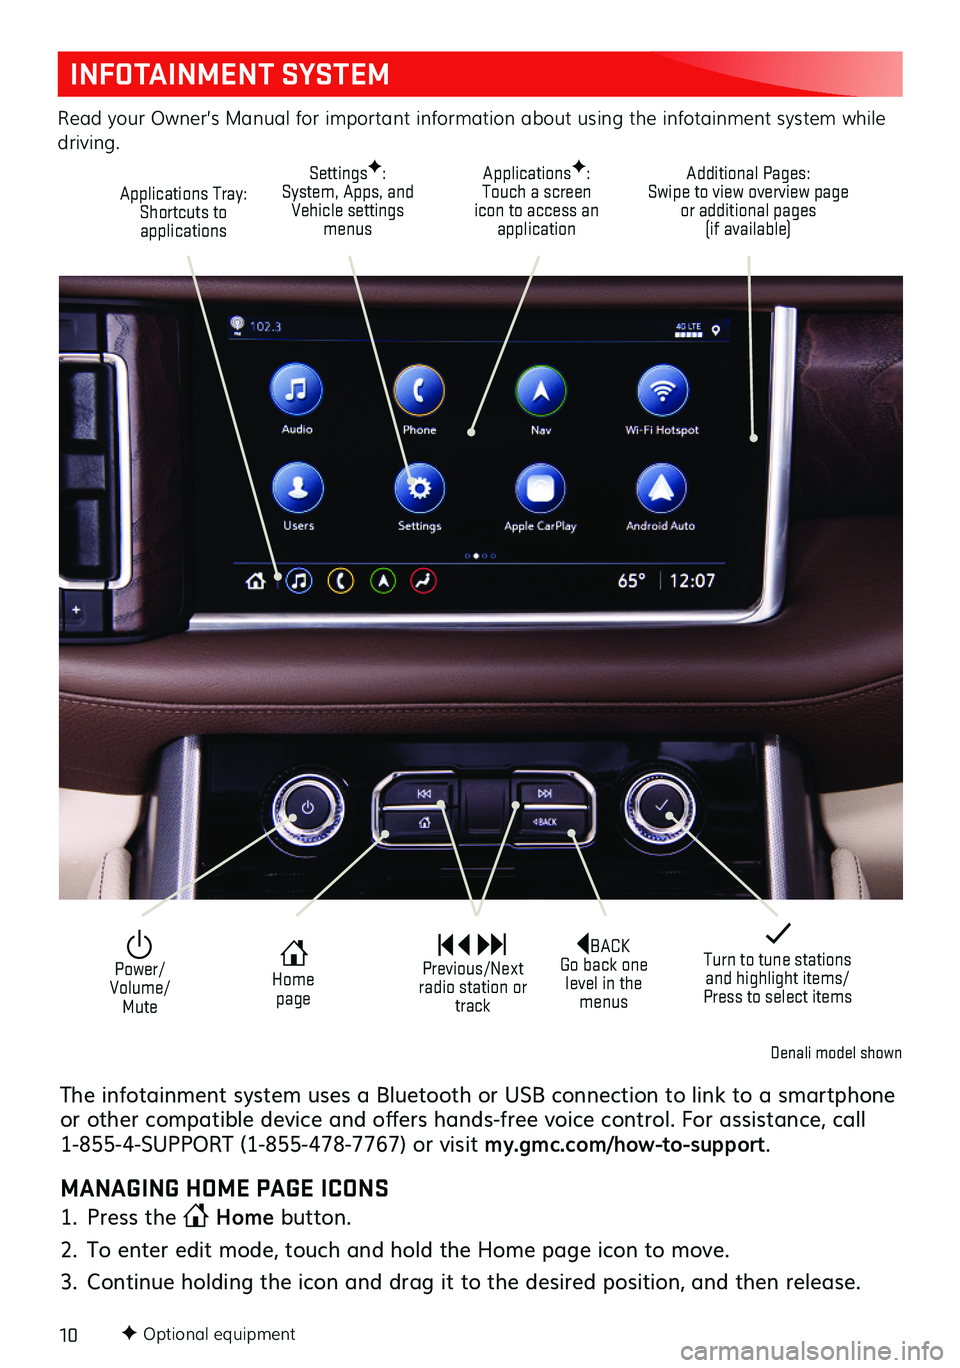 GMC YUKON 2021  Get To Know Guide 10F Optional equipment
INFOTAINMENT SYSTEM
Read your Owner’s Manual for important information about using the infotainment system while driving. 
Additional Pages: Swipe to view overview page or add